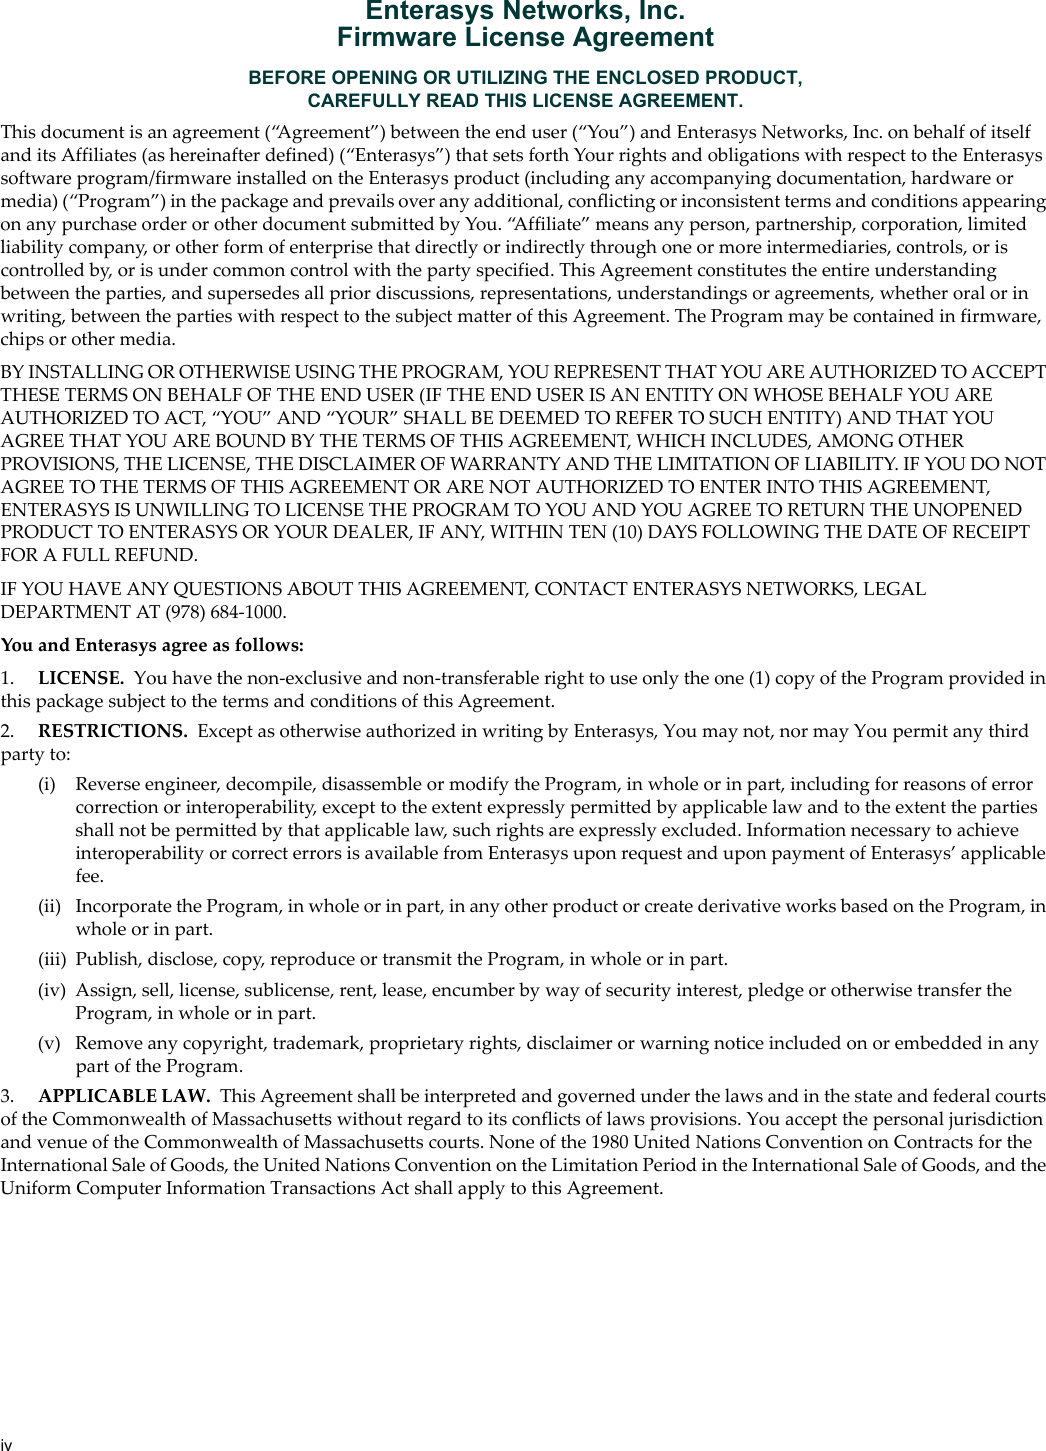 ivEnterasys Networks, Inc.Firmware License AgreementBEFORE OPENING OR UTILIZING THE ENCLOSED PRODUCT,CAREFULLY READ THIS LICENSE AGREEMENT.Thisdocumentisanagreement(“Agreement”)betweentheenduser(“You”)andEnterasys Networks, Inc.onbehalfofitselfanditsAffiliates(ashereinafterdefined)(“Enterasys”)thatsetsforthYourrightsandobligationswithrespecttotheEnterasyssoftwareprogram/firmwareinstalledontheEnterasysproduct(includinganyaccompanyingdocumentation,hardwareormedia)(“Program”)inthepackageandprevailsoveranyadditional,conflictingorinconsistenttermsandconditionsappearingonanypurchaseorderorotherdocumentsubmittedbyYou.“Affiliate”meansanyperson,partnership,corporation,limitedliabilitycompany,orotherformofenterprisethatdirectlyorindirectlythroughoneormoreintermediaries,controls,oriscontrolledby,orisundercommoncontrolwiththepartyspecified.ThisAgreementconstitutestheentireunderstandingbetweentheparties,andsupersedesallpriordiscussions,representations,understandingsoragreements,whetheroralorinwriting,betweenthepartieswithrespecttothesubjectmatterofthisAgreement.TheProgrammaybecontainedinfirmware,chipsorothermedia.BYINSTALLINGOROTHERWISEUSINGTHEPROGRAM,YOUREPRESENTTHATYOUAREAUTHORIZEDTOACCEPTTHESETERMSONBEHALFOFTHEENDUSER(IFTHEENDUSERISANENTITYONWHOSEBEHALFYOUAREAUTHORIZEDTOACT,“YOU”AND“YOUR”SHALLBEDEEMEDTOREFERTOSUCHENTITY)ANDTHATYOUAGREETHATYOUAREBOUNDBYTHETERMSOFTHISAGREEMENT,WHICHINCLUDES,AMONGOTHERPROVISIONS,THELICENSE,THEDISCLAIMEROFWARRANTYANDTHELIMITATIONOFLIABILITY.IFYOUDONOTAGREETOTHETERMSOFTHISAGREEMENTORARENOTAUTHORIZEDTOENTERINTOTHISAGREEMENT,ENTERASYSISUNWILLINGTOLICENSETHEPROGRAMTOYOUANDYOUAGREETORETURNTHEUNOPENEDPRODUCTTOENTERASYSORYOURDEALER,IFANY,WITHINTEN(10)DAYSFOLLOWINGTHEDATEOFRECEIPTFORAFULLREFUND.IFYOUHAVEANYQUESTIONSABOUTTHISAGREEMENT,CONTACTENTERASYS NETWORKS,LEGALDEPARTMENTAT(978)684‐1000.YouandEnterasysagreeasfollows:1. LICENSE. Youhavethenon‐exclusiveandnon‐transferablerighttouseonlytheone(1)copyoftheProgramprovidedinthispackagesubjecttothetermsandconditionsofthisAgreement.2. RESTRICTIONS. ExceptasotherwiseauthorizedinwritingbyEnterasys,Youmaynot,normayYoupermitanythirdpartyto:(i) Reverseengineer,decompile,disassembleormodifytheProgram,inwholeorinpart,includingforreasonsoferrorcorrectionorinteroperability,excepttotheextentexpresslypermittedbyapplicablelawandtotheextentthepartiesshallnotbepermittedbythatapplicablelaw,suchrightsareexpresslyexcluded.InformationnecessarytoachieveinteroperabilityorcorrecterrorsisavailablefromEnterasysuponrequestanduponpaymentofEnterasys’applicablefee.(ii) IncorporatetheProgram,inwholeorinpart,inanyotherproductorcreatederivativeworksbasedontheProgram,inwholeorinpart.(iii) Publish,disclose,copy,reproduceortransmittheProgram,inwholeorinpart.(iv) Assign,sell,license,sublicense,rent,lease,encumberbywayofsecurityinterest,pledgeorotherwisetransfertheProgram,inwholeorinpart.(v) Removeanycopyright,trademark,proprietaryrights,disclaimerorwarningnoticeincludedonorembeddedinanypartoftheProgram.3. APPLICABLELAW. ThisAgreementshallbeinterpretedandgovernedunderthelawsandinthestateandfederalcourtsoftheCommonwealthofMassachusettswithoutregardtoitsconflictsoflawsprovisions.YouacceptthepersonaljurisdictionandvenueoftheCommonwealthofMassachusettscourts.Noneofthe1980UnitedNationsConventiononContractsfortheInternationalSaleofGoods,theUnitedNationsConventionontheLimitationPeriodintheInternationalSaleofGoods,andtheUniformComputerInformationTransactionsActshallapplytothisAgreement.